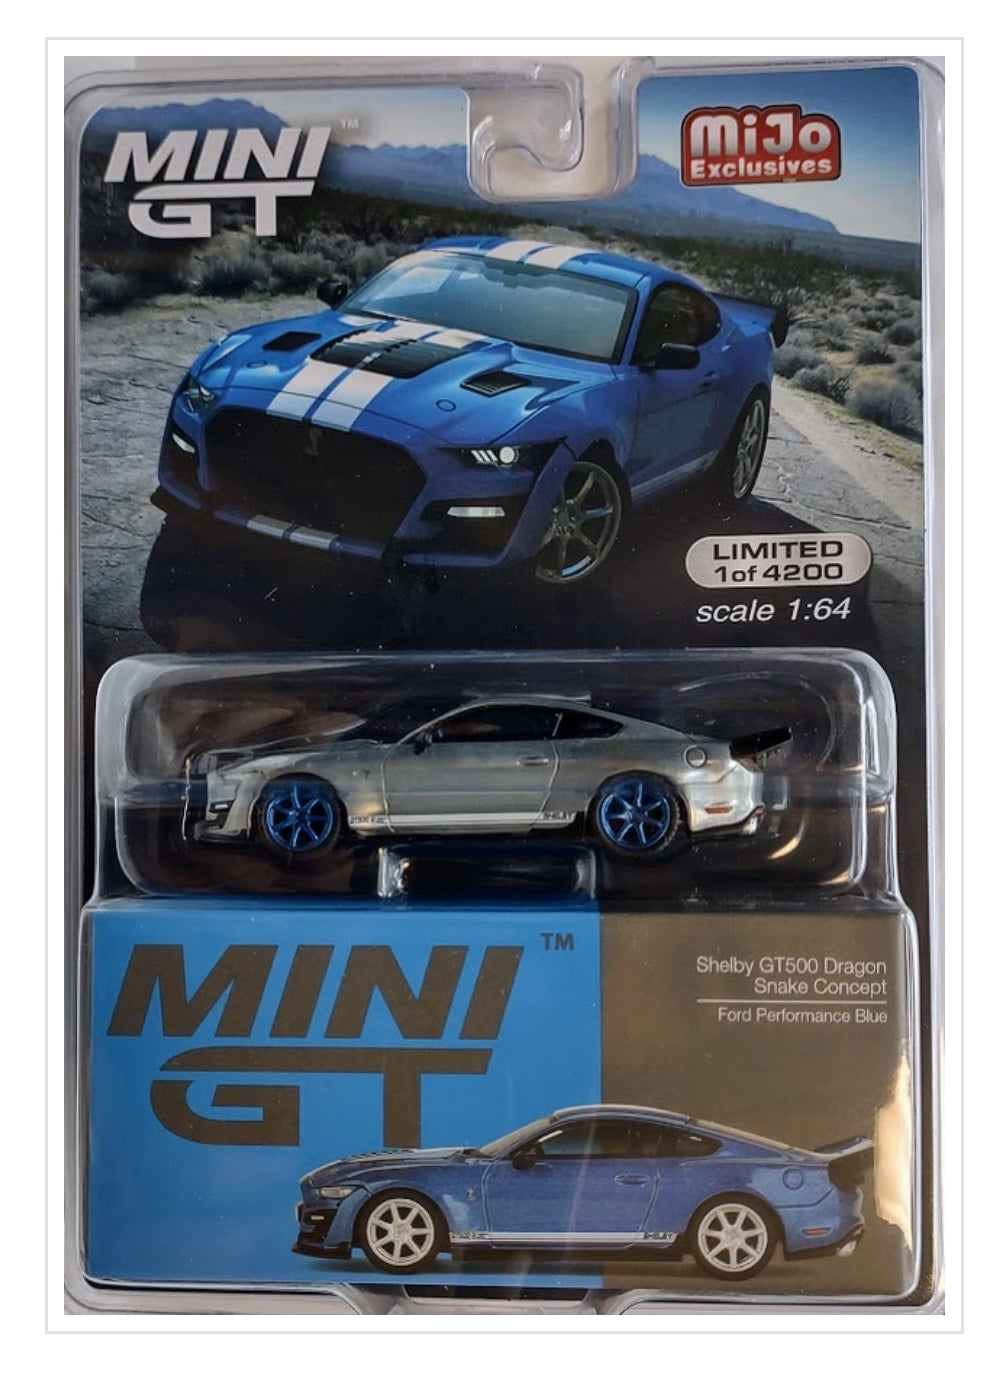 CHASE CAR-Ford Mustang Shelby GT500 Dragon Snake Concept